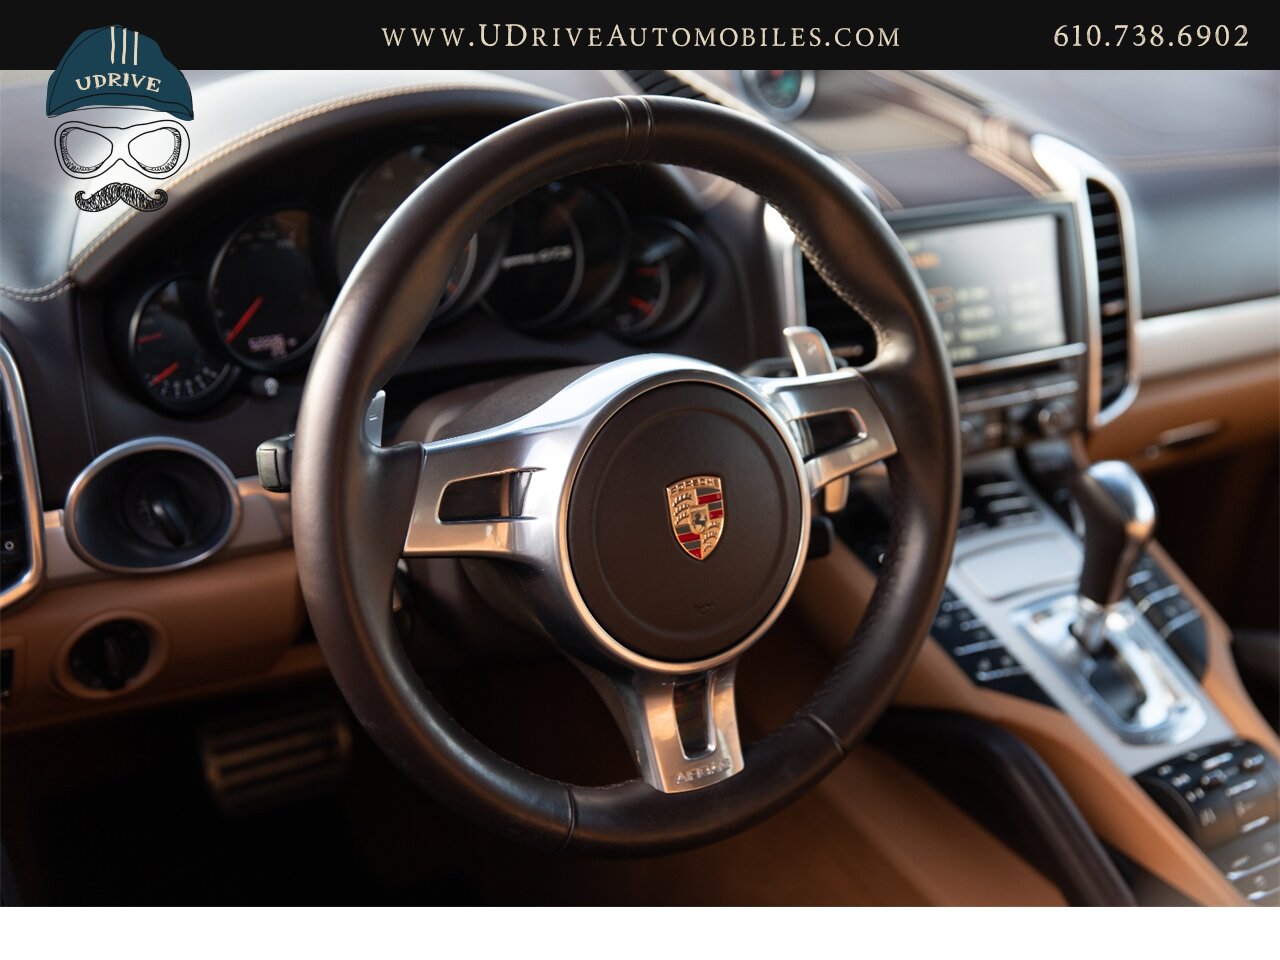 2013 Porsche Cayenne GTS Service History 1 Owner 21in Wheels  Espresso / Cognac Two Tone Leather - Photo 30 - West Chester, PA 19382